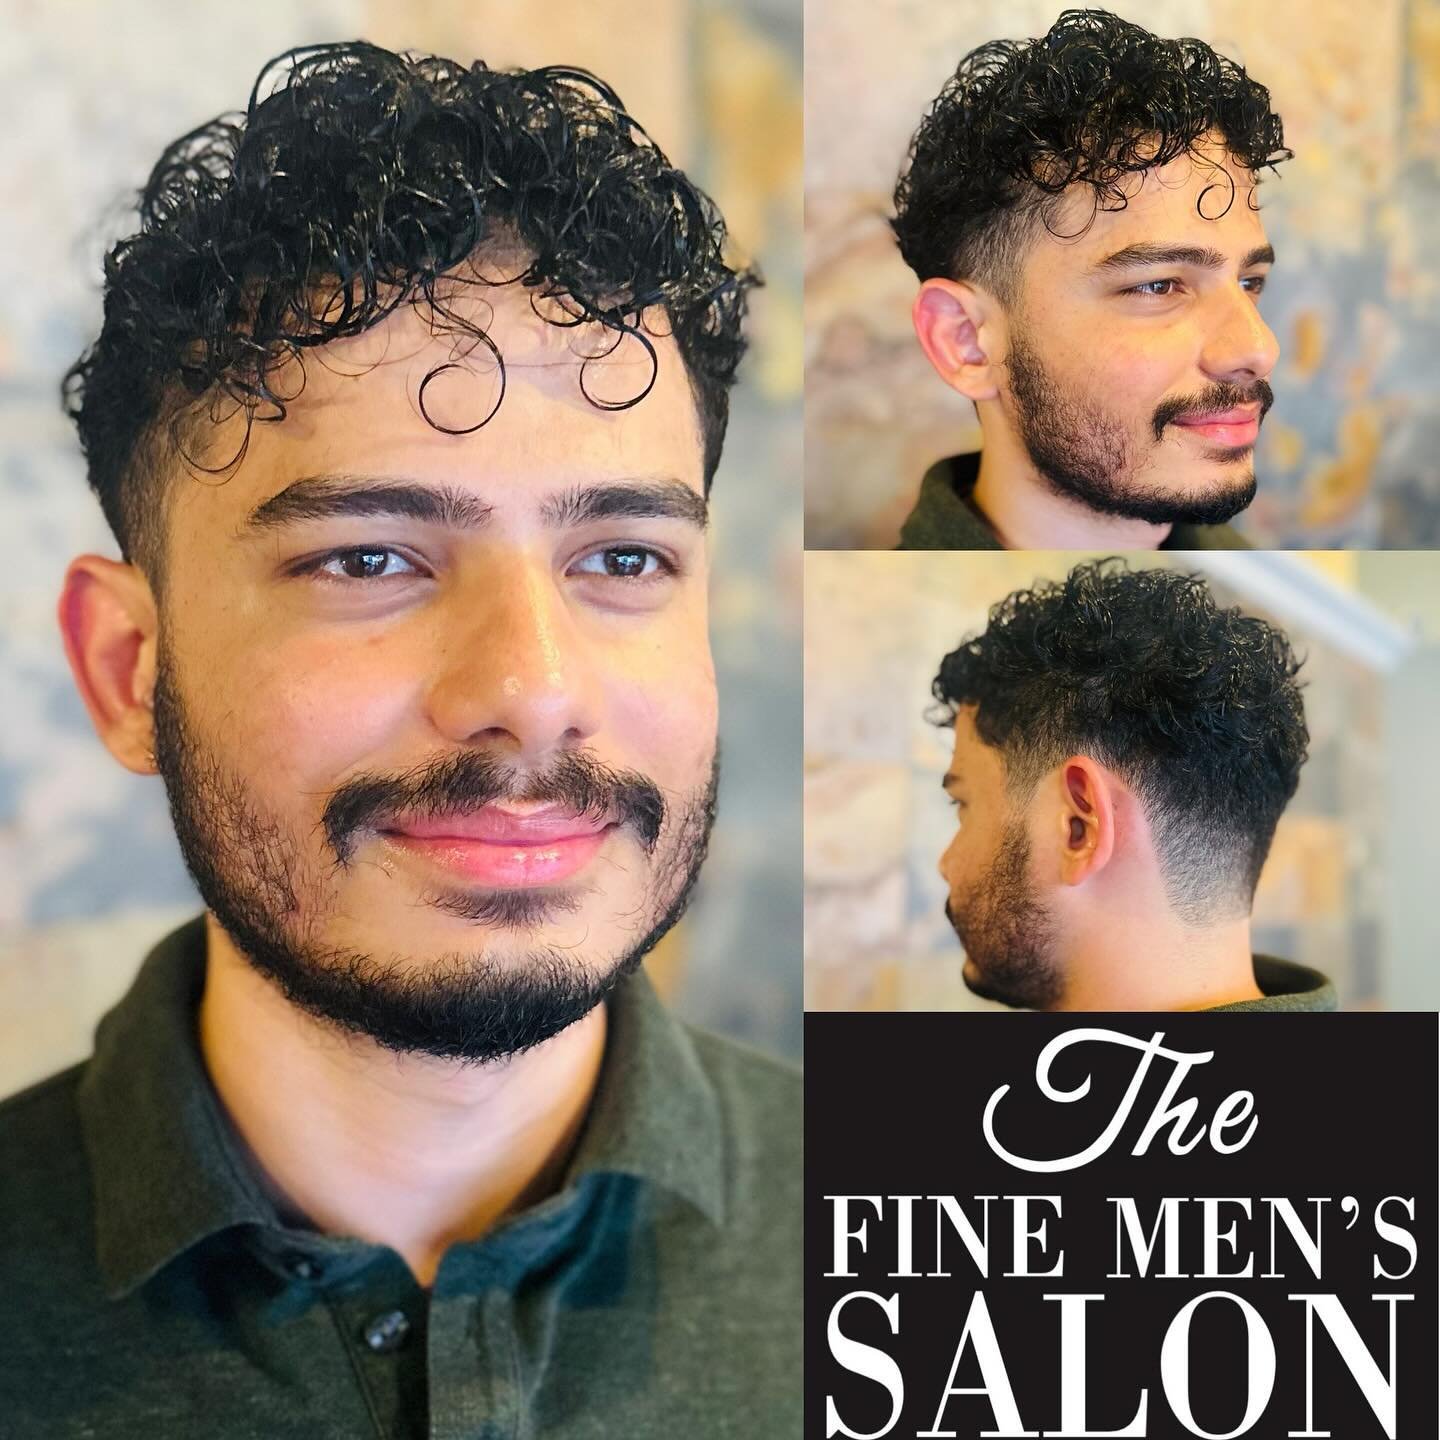 Every man should have a magnifying mirror. If you look good magnified, you are set to go. Be Your Best Handsome You! 💪
✨Haircut | Style by Neli
✨Call 914-412-7755
✨Online Reservations Available at: Link in Bio or thefinemenssalon.com
✨Walk In, Have 